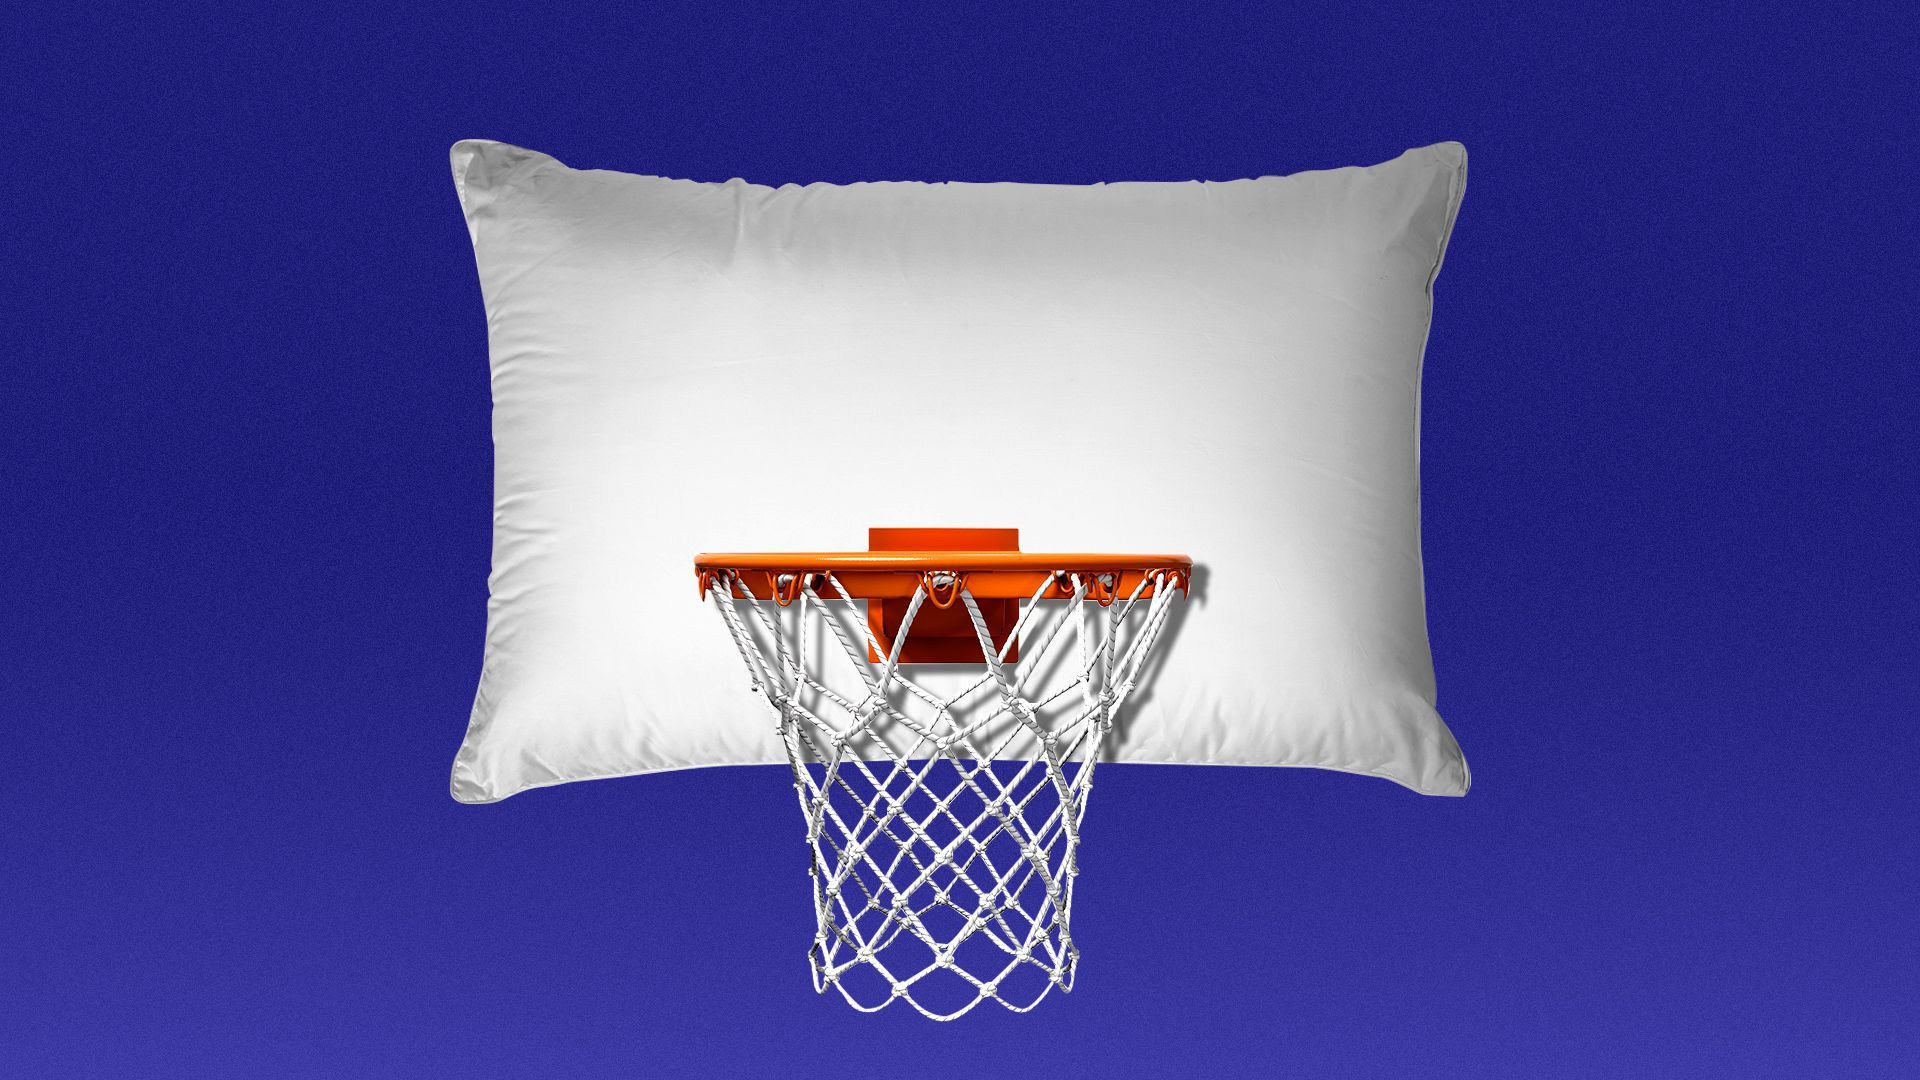 an illustration of a basketball hoop where the backboard is a pillow